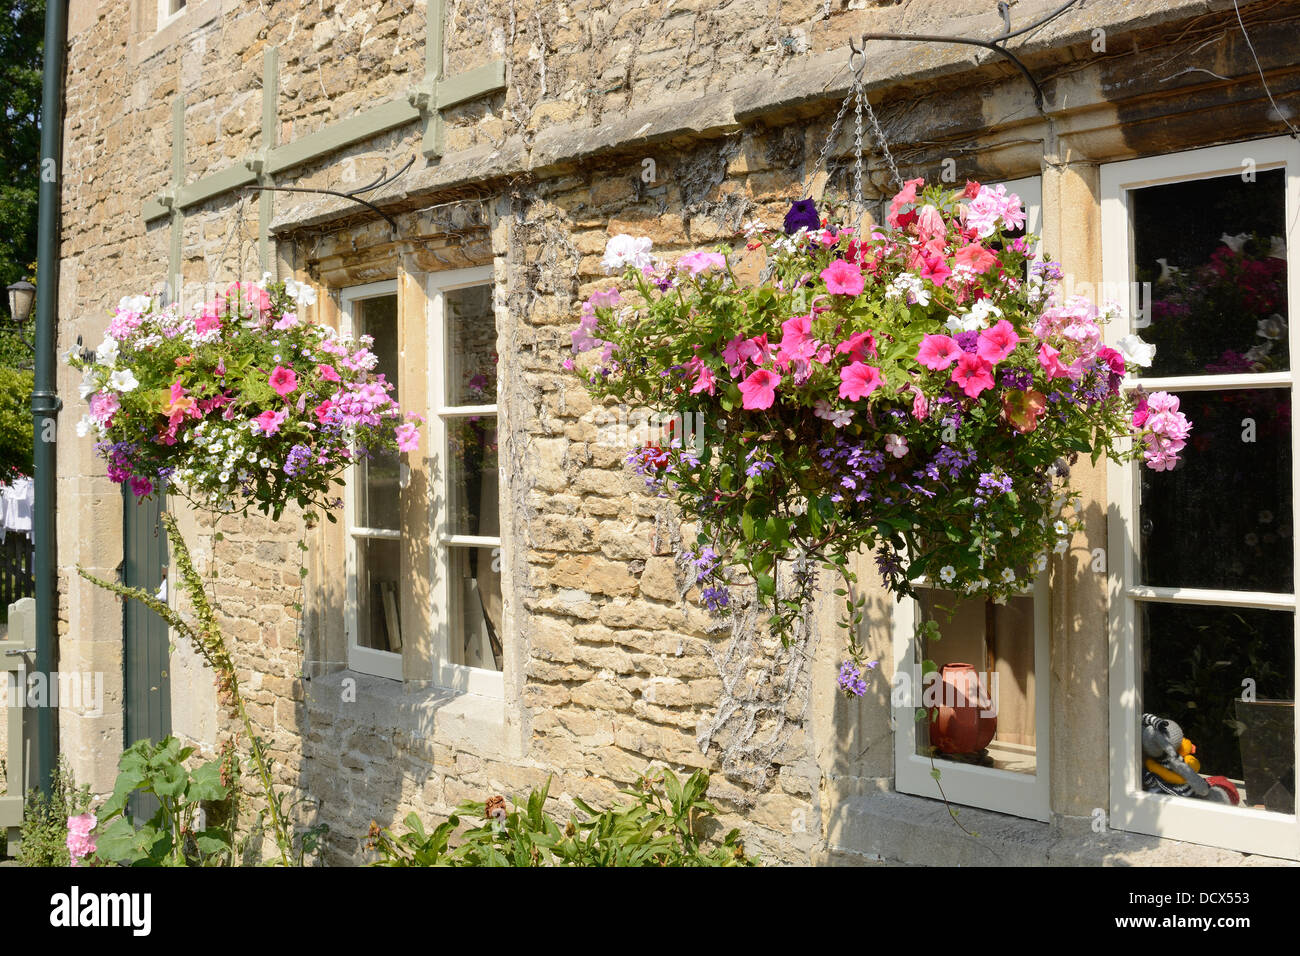 Stone cottage with hanging flower baskets in front of windows ...